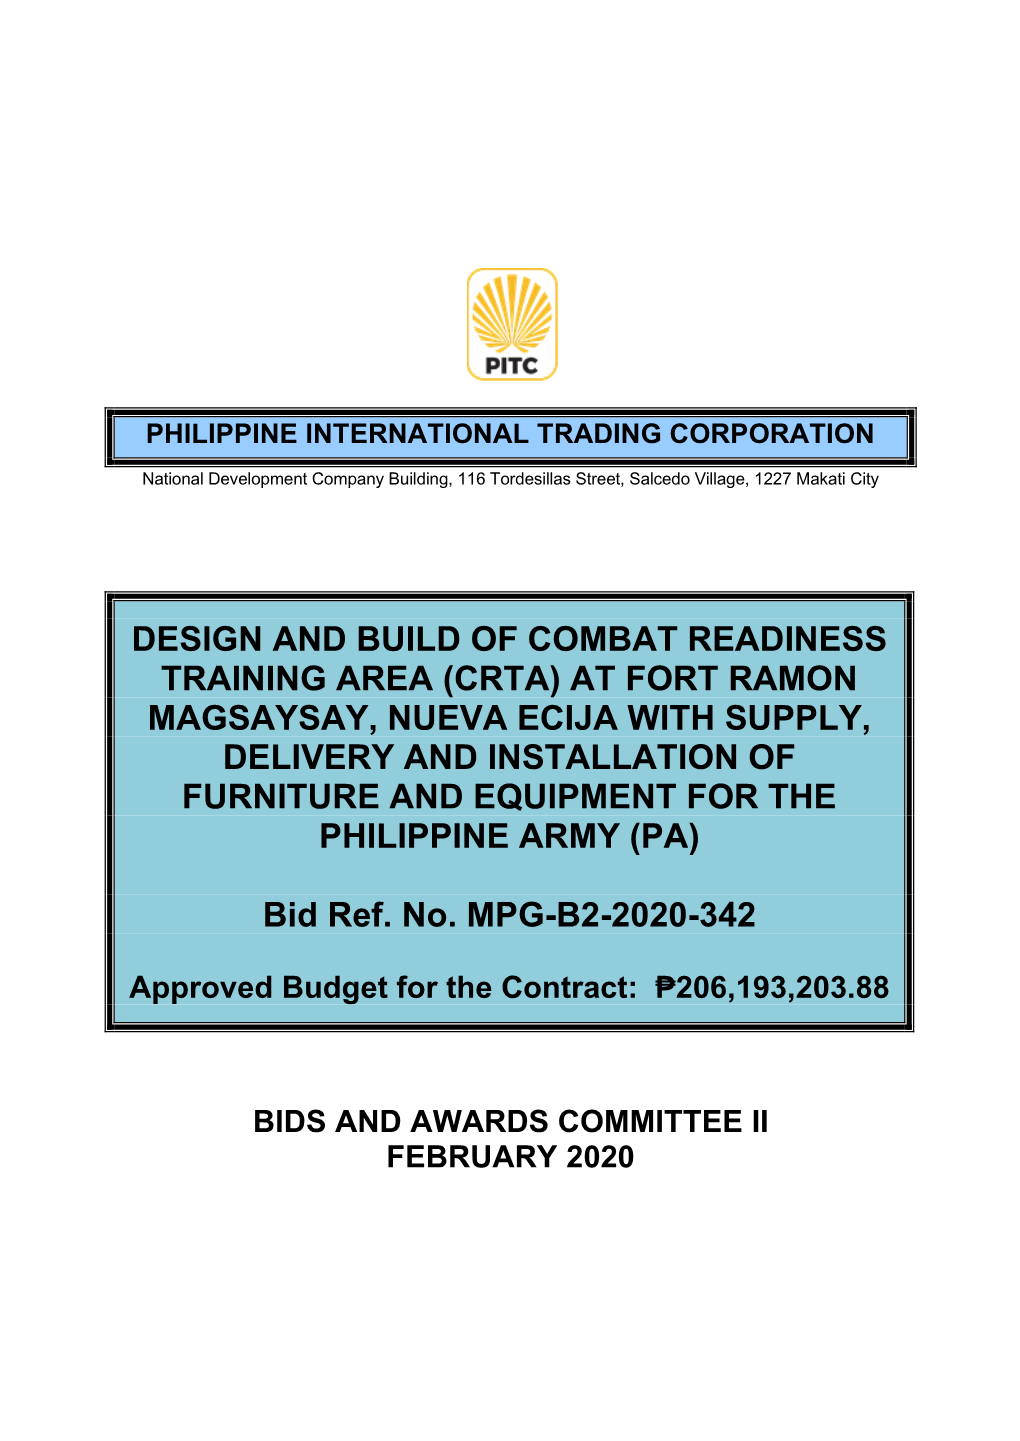 Design and Build of Combat Readiness Training Area (Crta) at Fort Ramon Magsaysay, Nueva Ecija with Supply, Delivery and Install